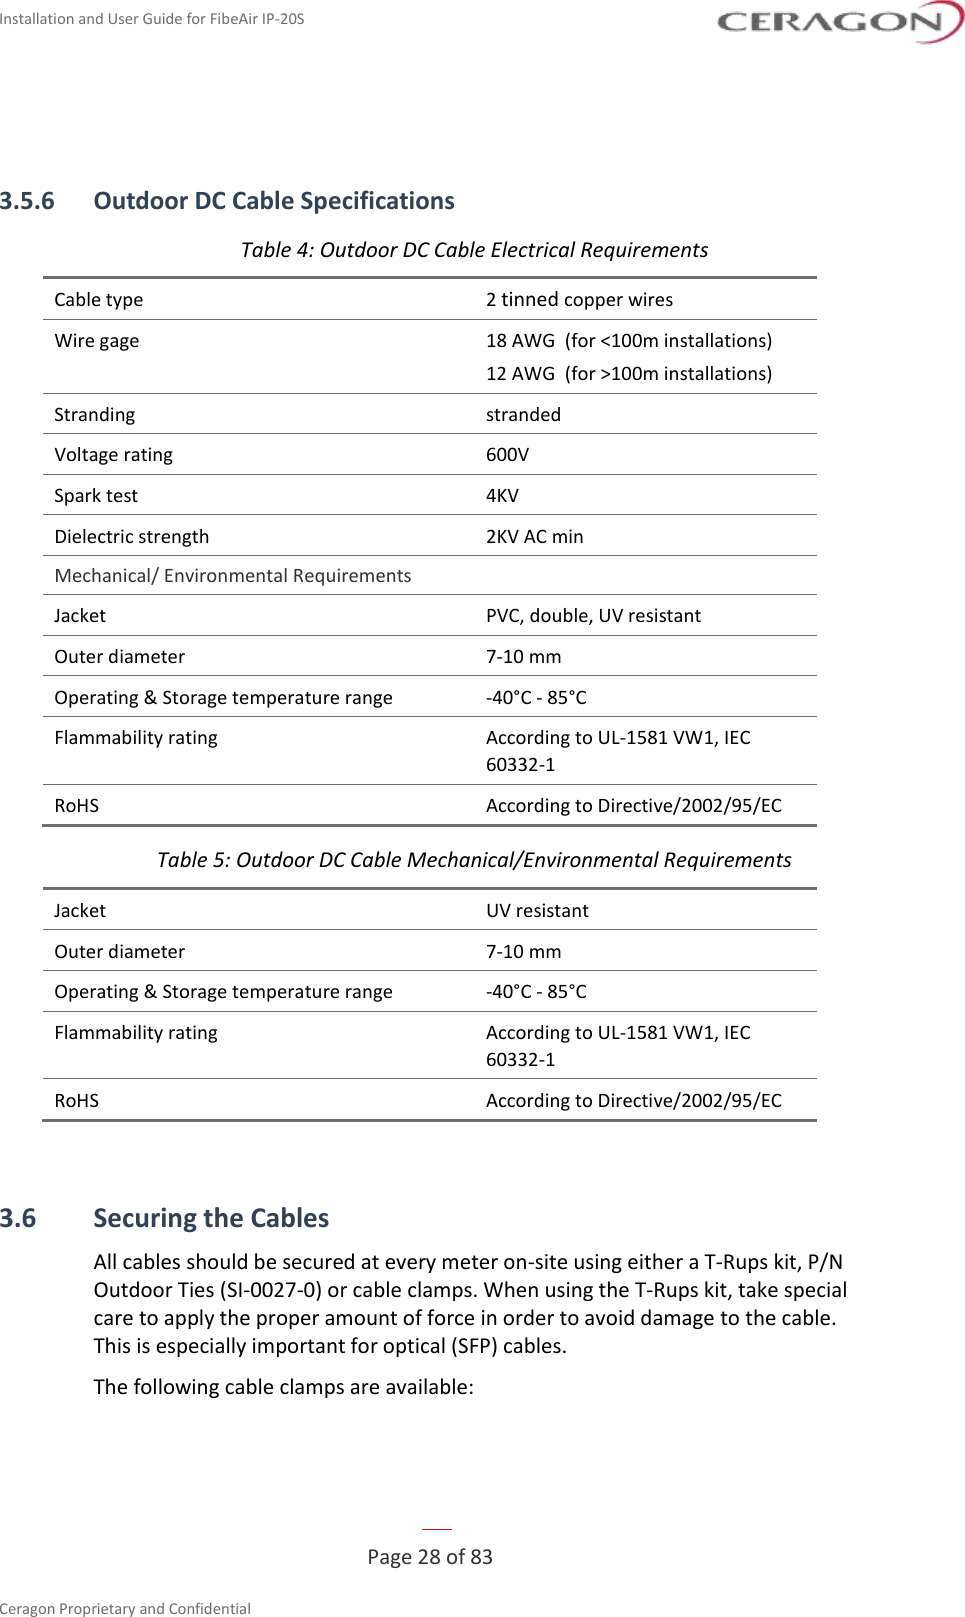 Installation and User Guide for FibeAir IP-20S   Page 28 of 83  Ceragon Proprietary and Confidential      3.5.6 Outdoor DC Cable Specifications Table 4: Outdoor DC Cable Electrical Requirements Cable type 2 tinned copper wires Wire gage 18 AWG  (for &lt;100m installations) 12 AWG  (for &gt;100m installations) Stranding  stranded Voltage rating 600V Spark test 4KV Dielectric strength 2KV AC min Mechanical/ Environmental Requirements Jacket PVC, double, UV resistant Outer diameter 7-10 mm Operating &amp; Storage temperature range -40°C - 85°C Flammability rating According to UL-1581 VW1, IEC 60332-1 RoHS According to Directive/2002/95/EC Table 5: Outdoor DC Cable Mechanical/Environmental Requirements Jacket UV resistant Outer diameter 7-10 mm Operating &amp; Storage temperature range -40°C - 85°C Flammability rating According to UL-1581 VW1, IEC 60332-1 RoHS According to Directive/2002/95/EC  3.6 Securing the Cables All cables should be secured at every meter on-site using either a T-Rups kit, P/N Outdoor Ties (SI-0027-0) or cable clamps. When using the T-Rups kit, take special care to apply the proper amount of force in order to avoid damage to the cable. This is especially important for optical (SFP) cables. The following cable clamps are available: 